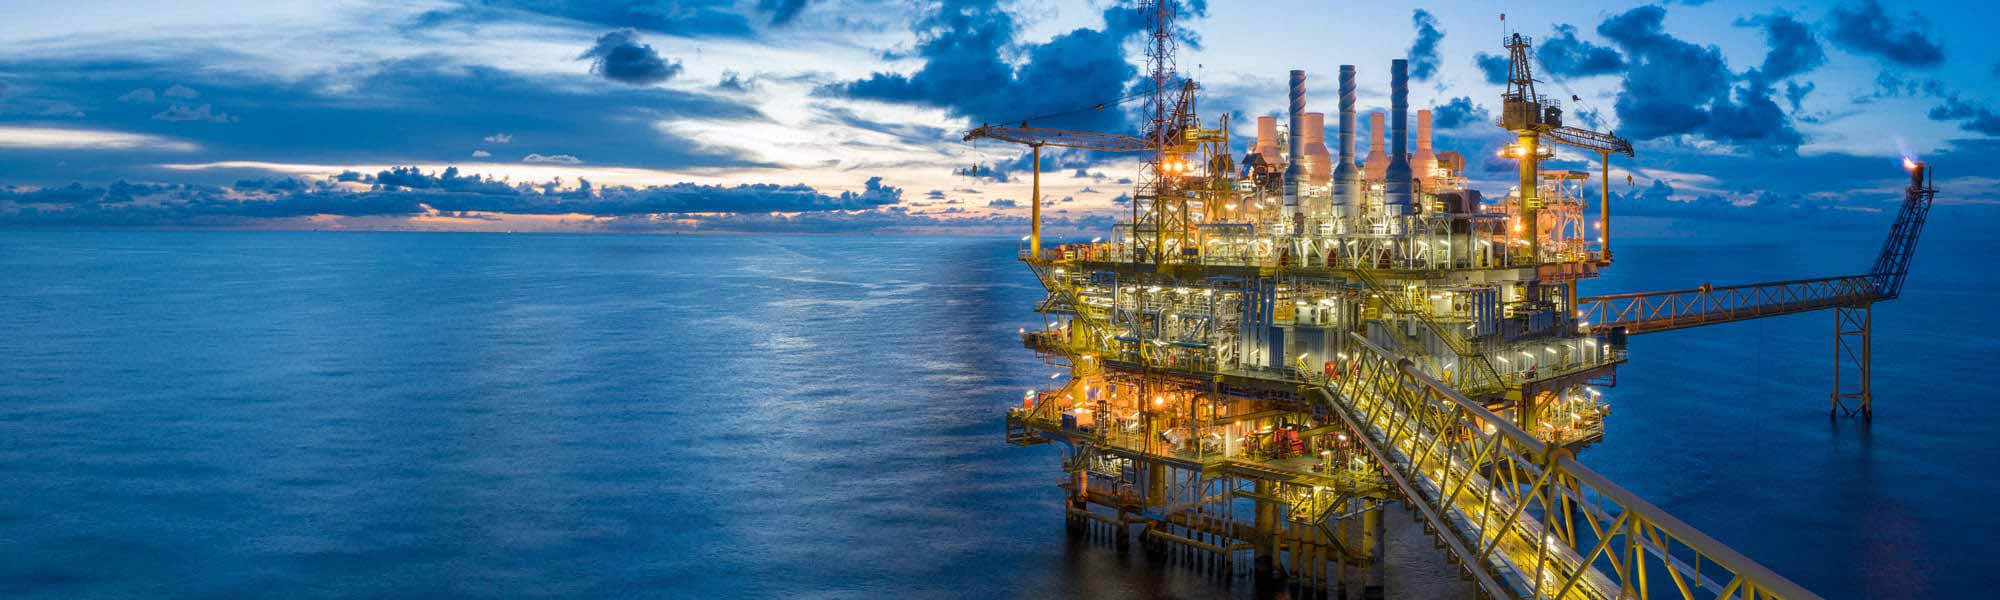 Fiber optic solutions for the oil and gas industry